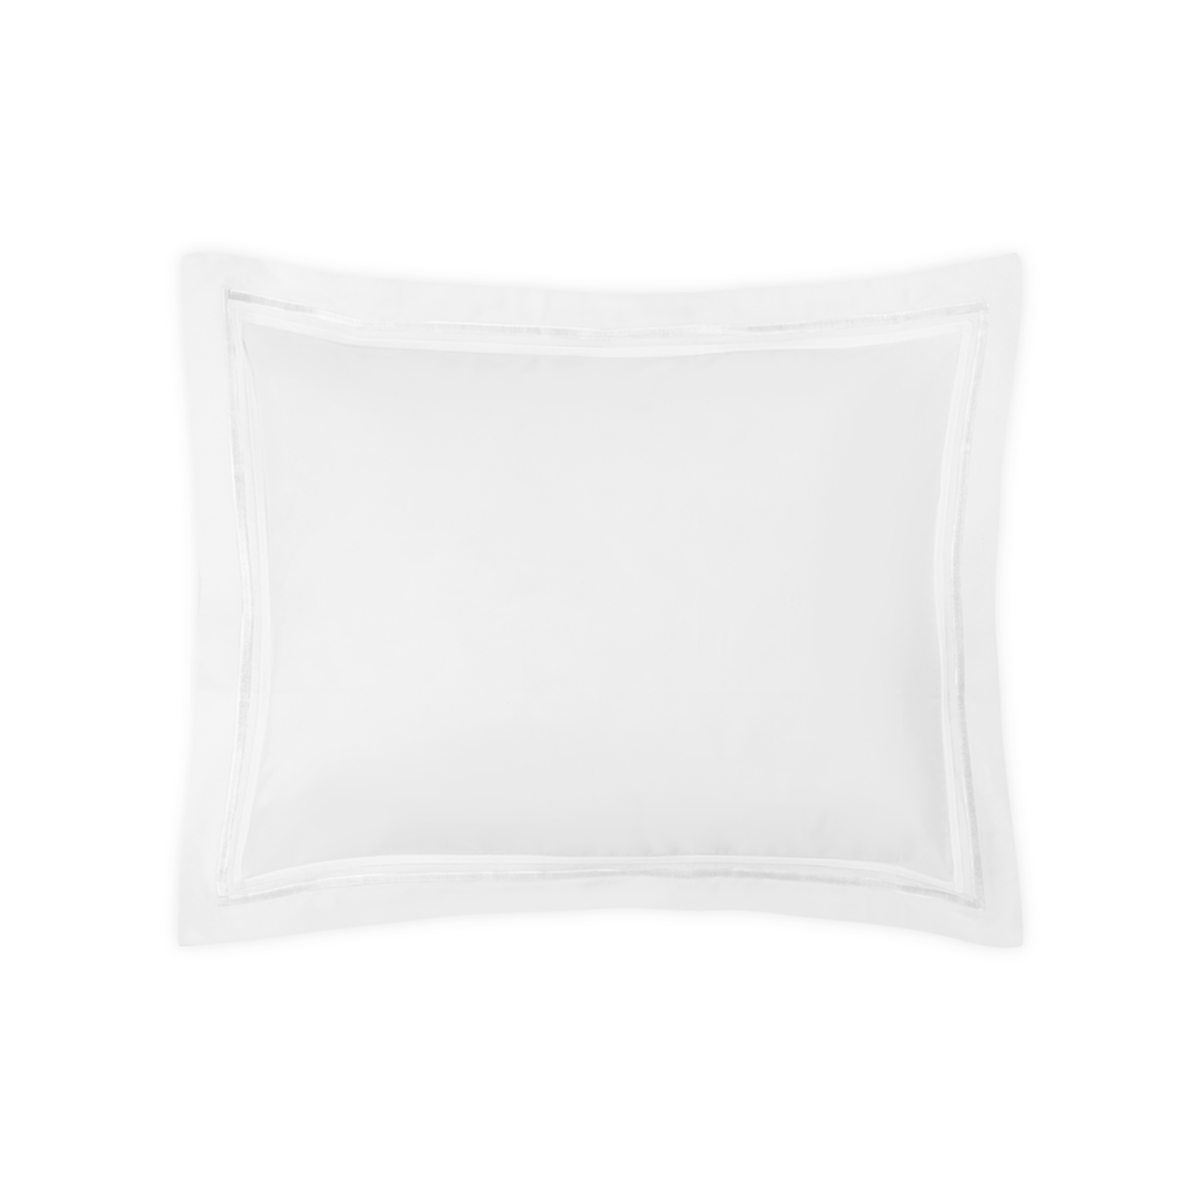 Sham of Matouk Essex Bedding Collection in White Color